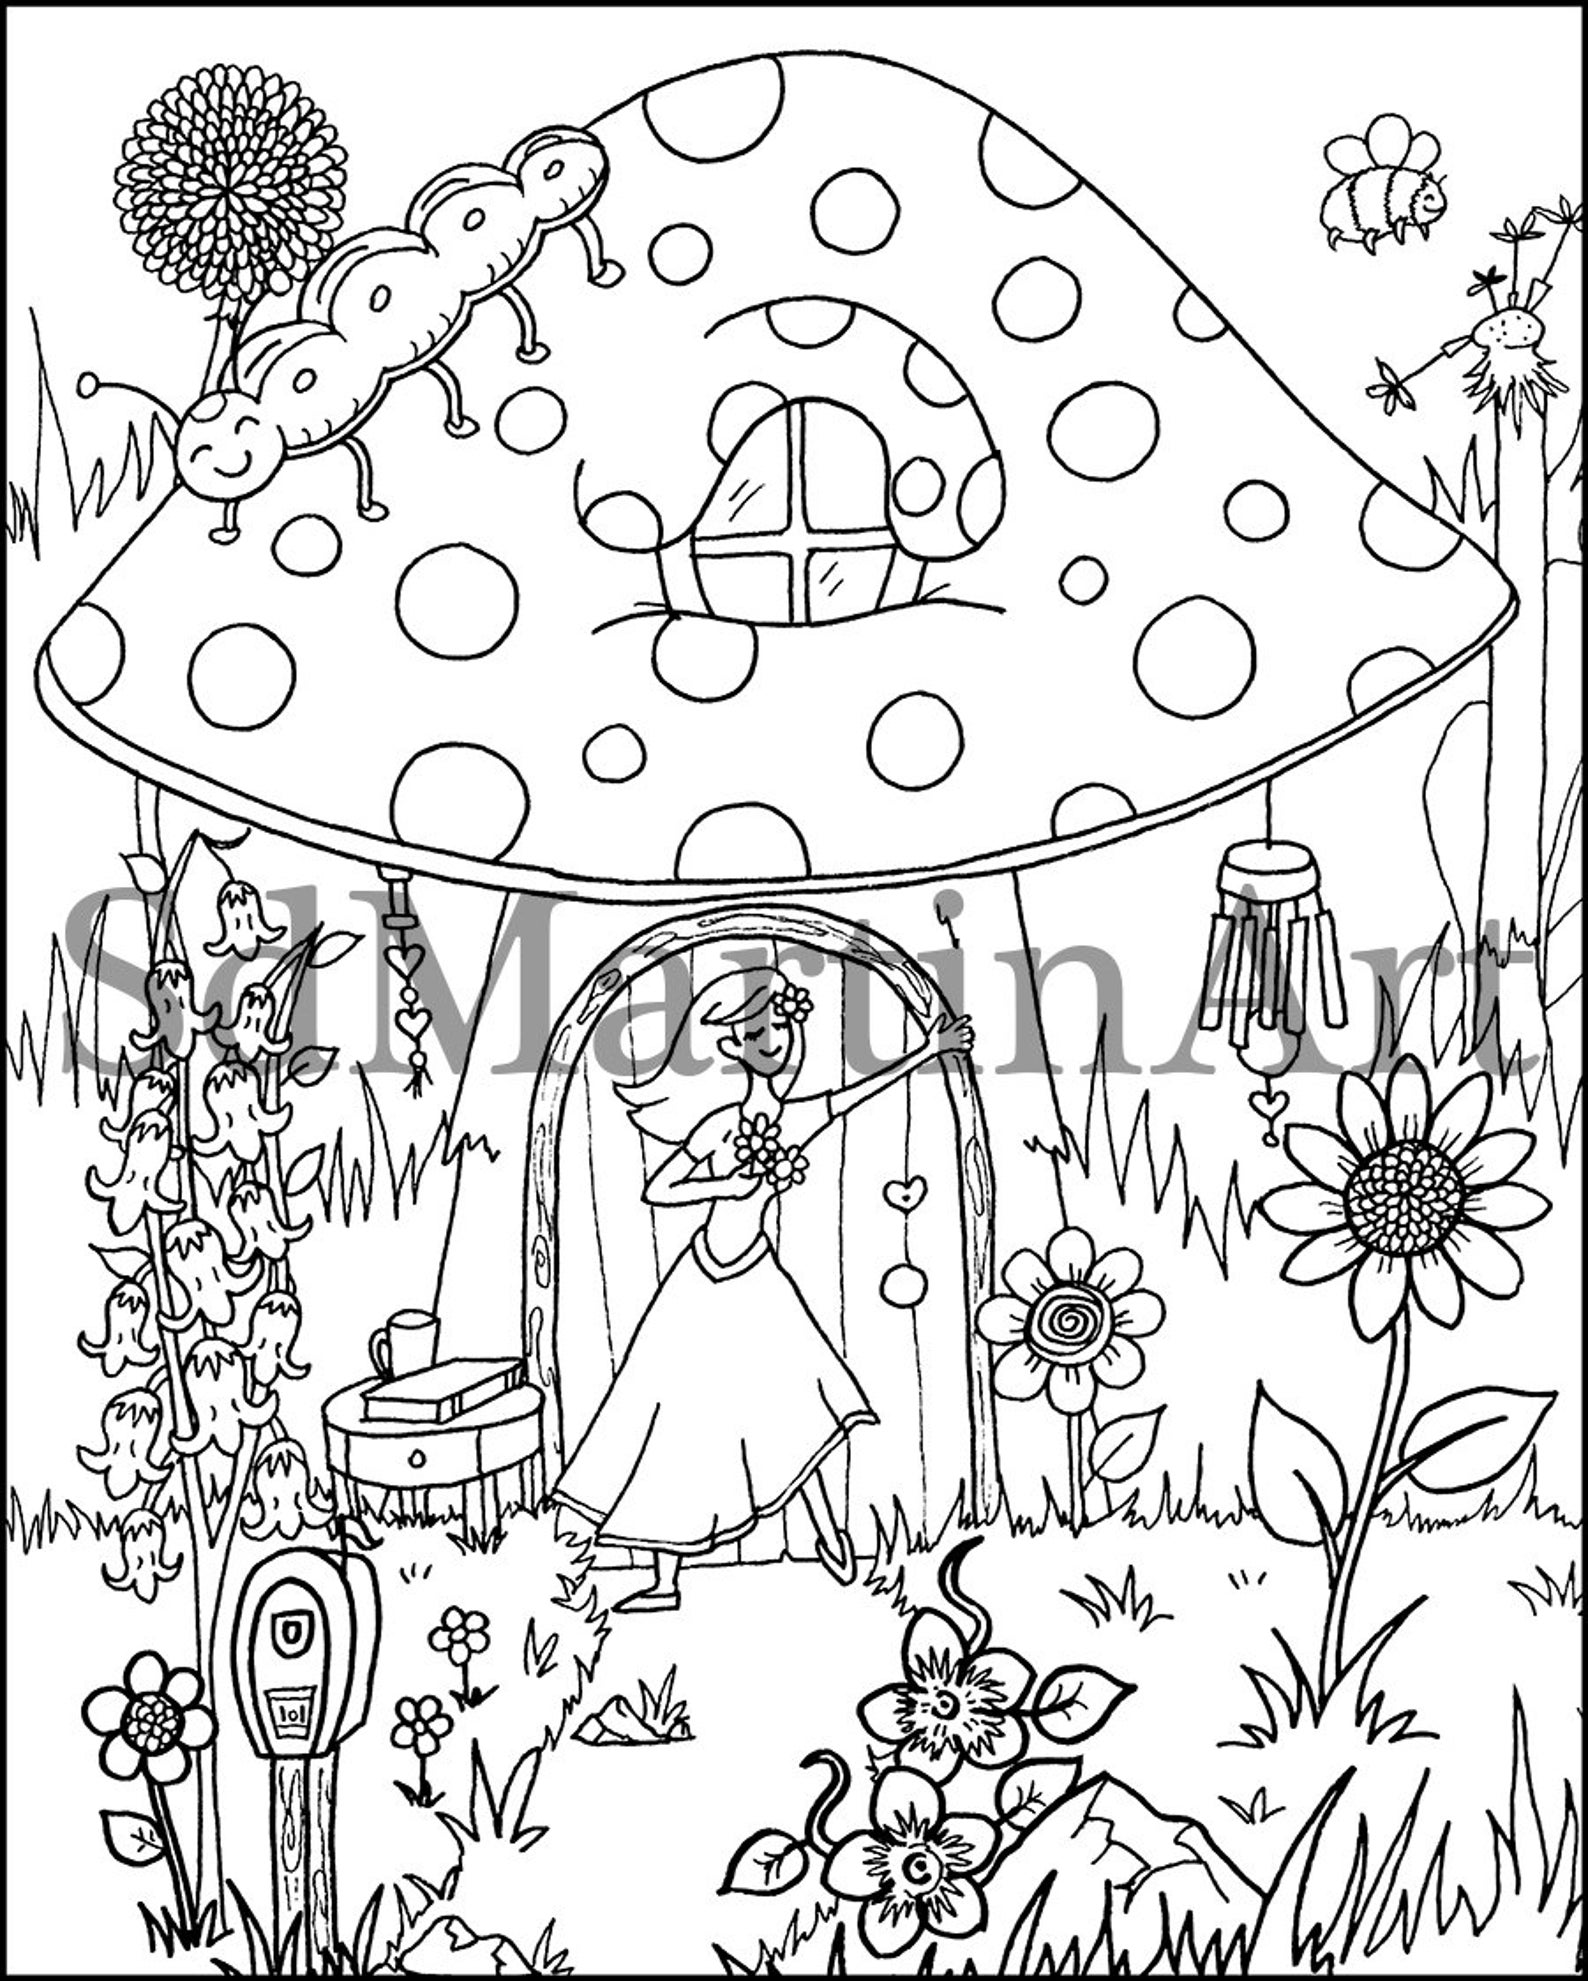 Fairy Mushroom House-Printable Adult Coloring Book Page-For | Etsy